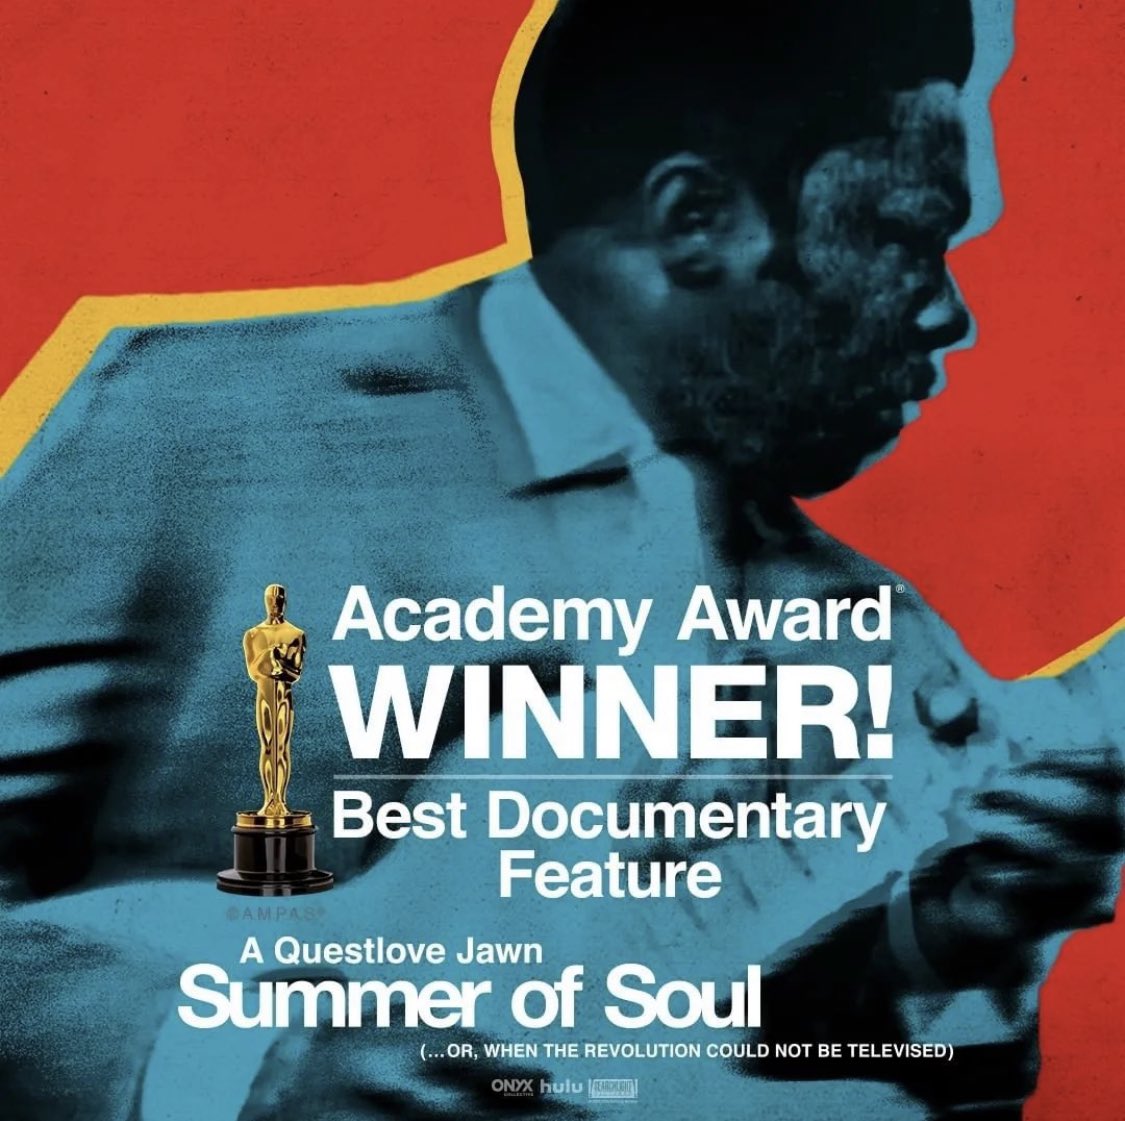 Stand up HARLEM! #SummerofSoulMovie CONGRATULATIONS on winning the Academy Award for Best Documentary Feature! @questlove @SearchlightPictures @hulu @OnyxCollective @TheAcademy #Oscars #Oscars2022 #Harlem #Community #MMPCIA